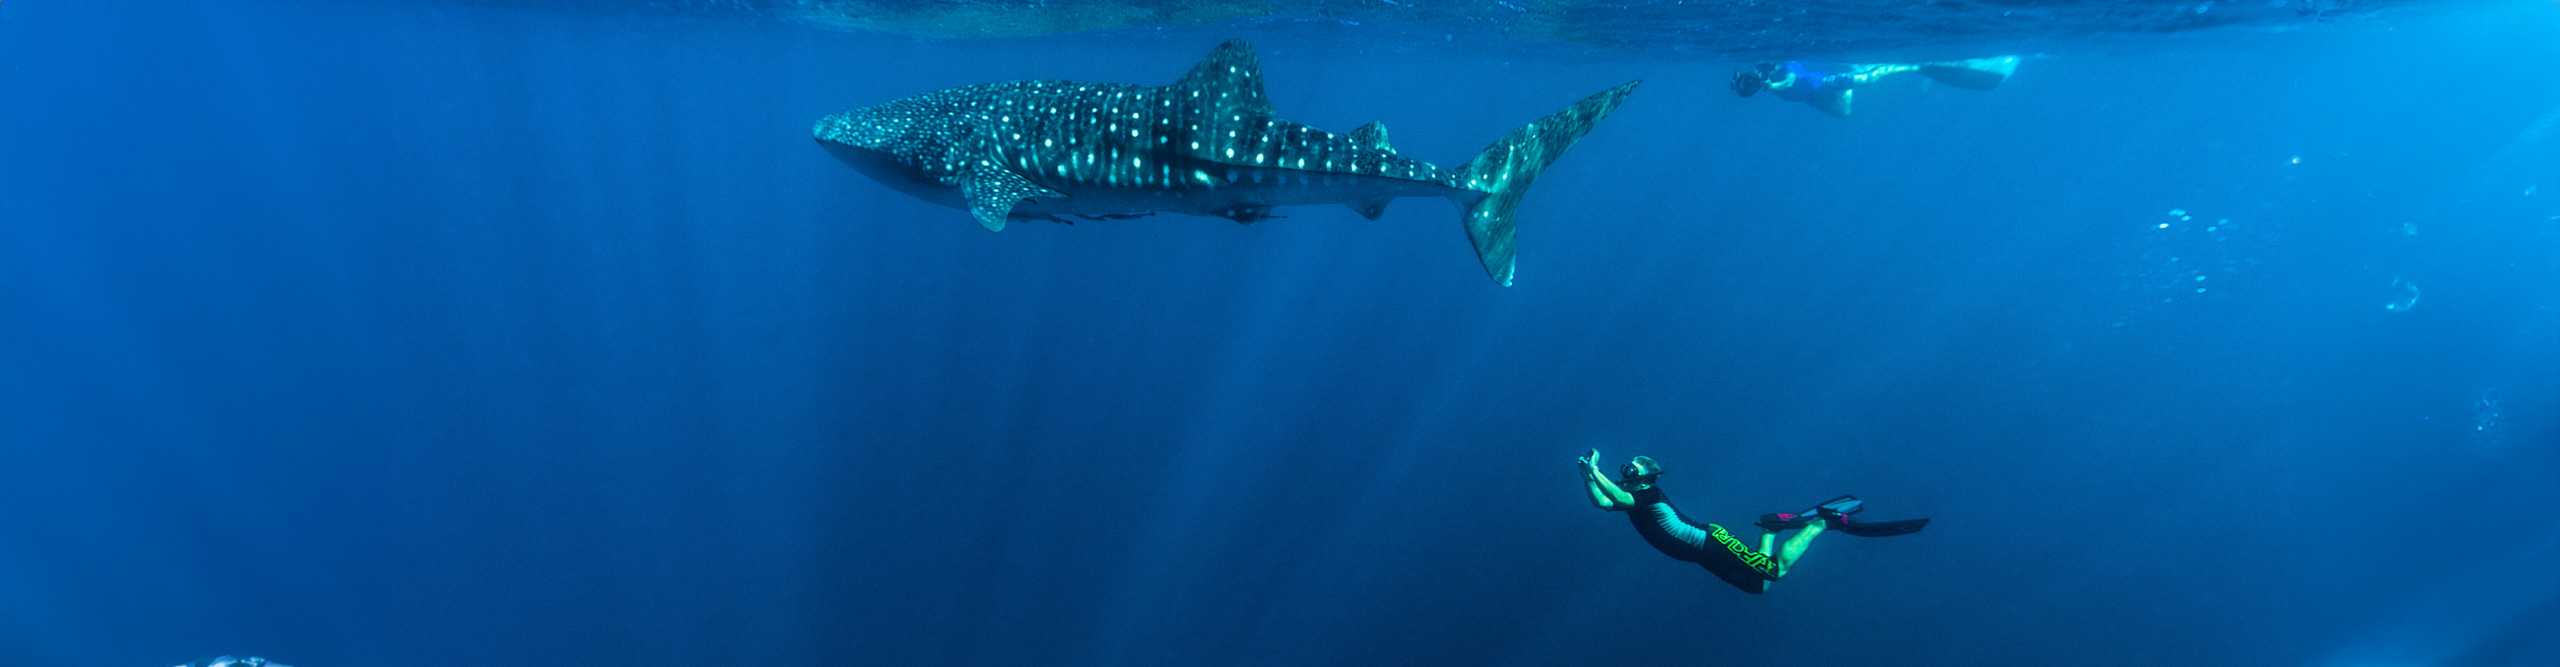 Researchers photographing a huge whale shark in the waters of Ningaloo Reef, Western Australia